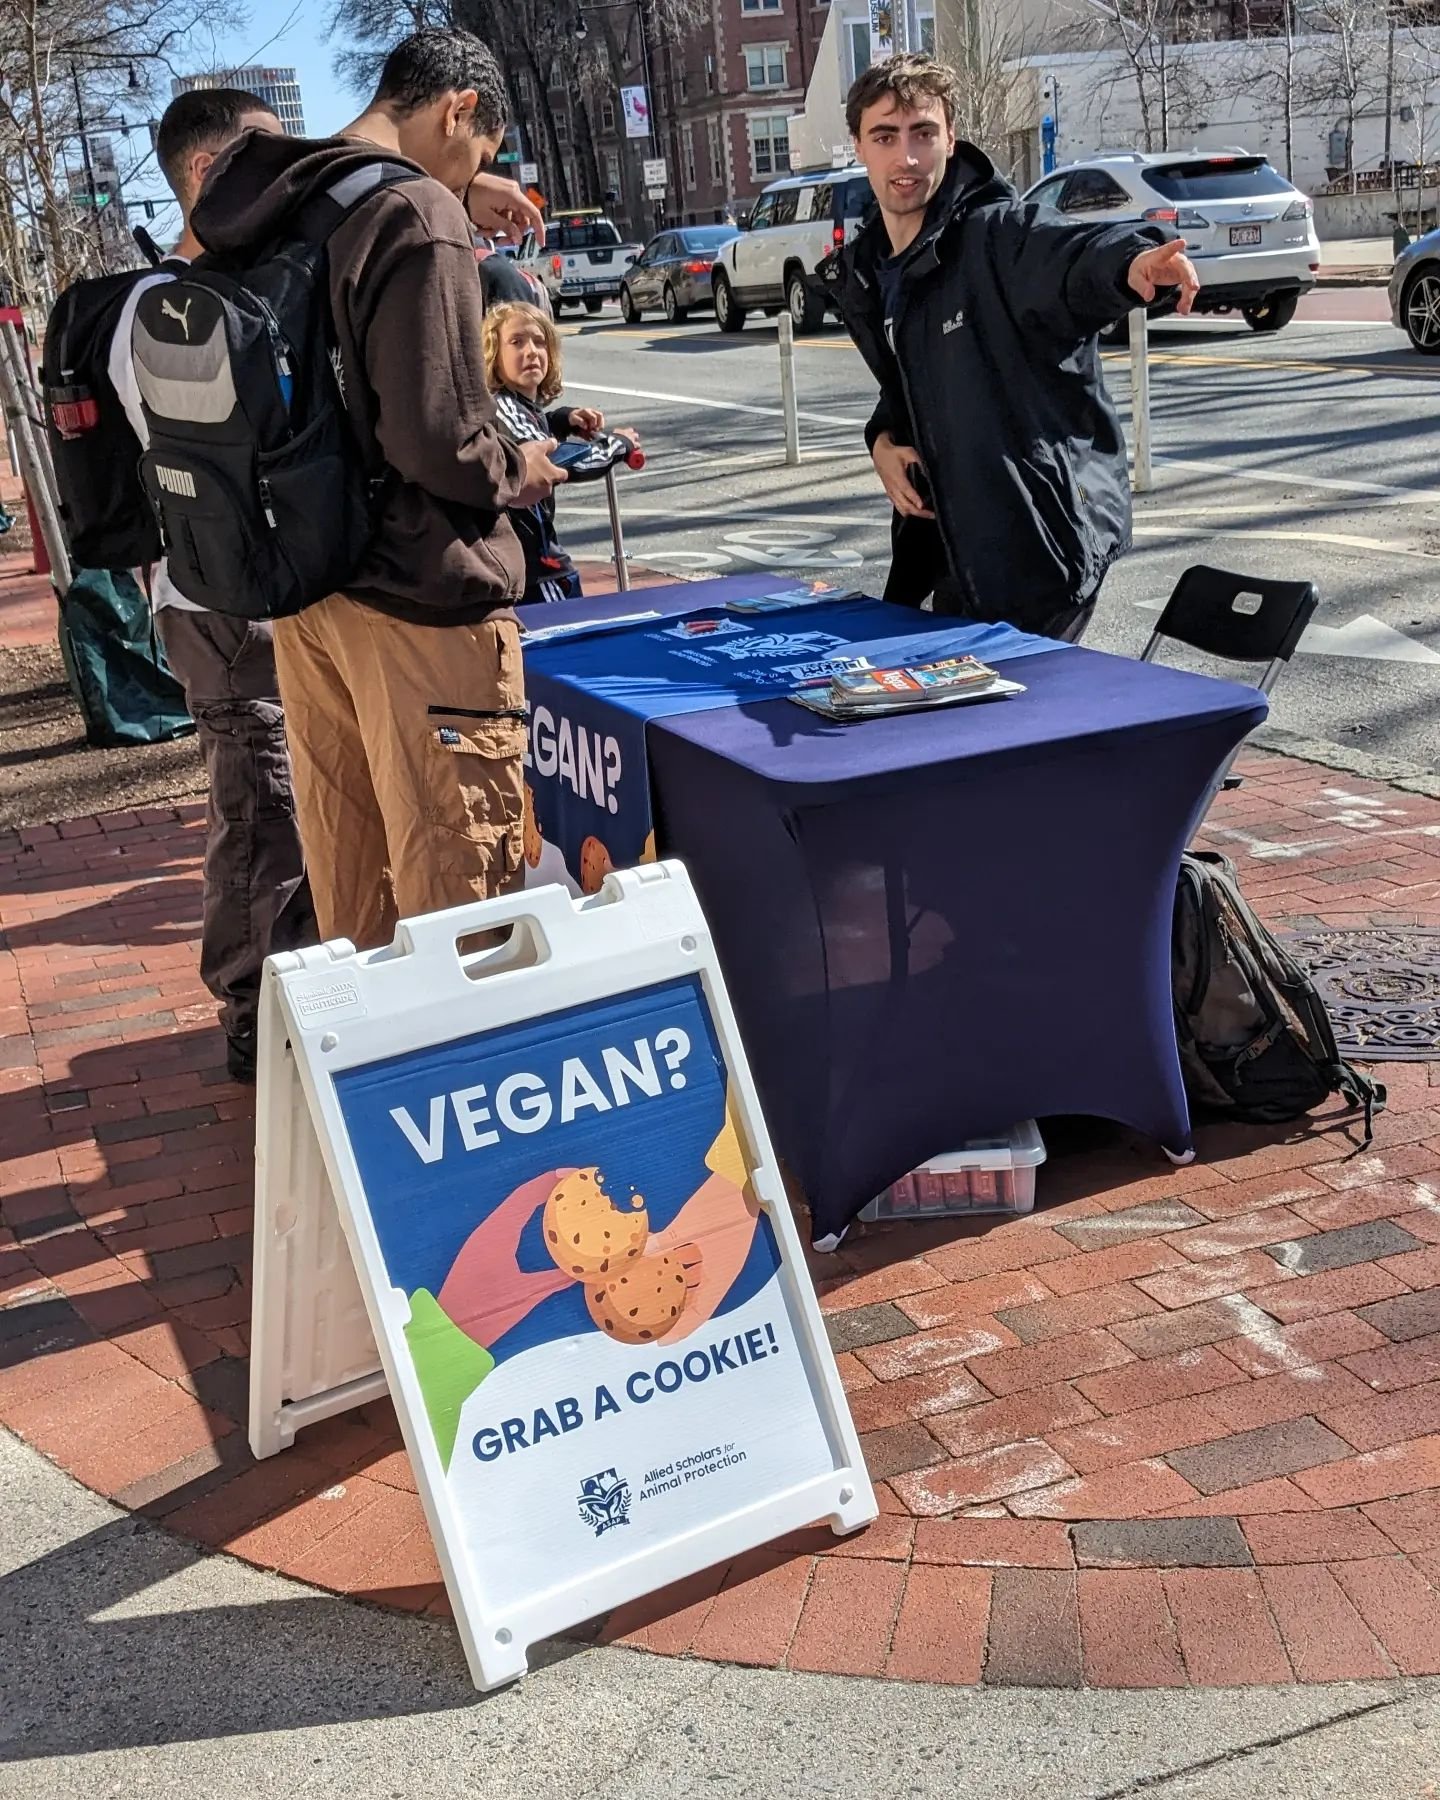 Vegan? Grab a cookie!

We're looking to build our student group at MIT. If you want to  stand up for animals and work with cool vegans, please reach out!

#cookie #food #tasty